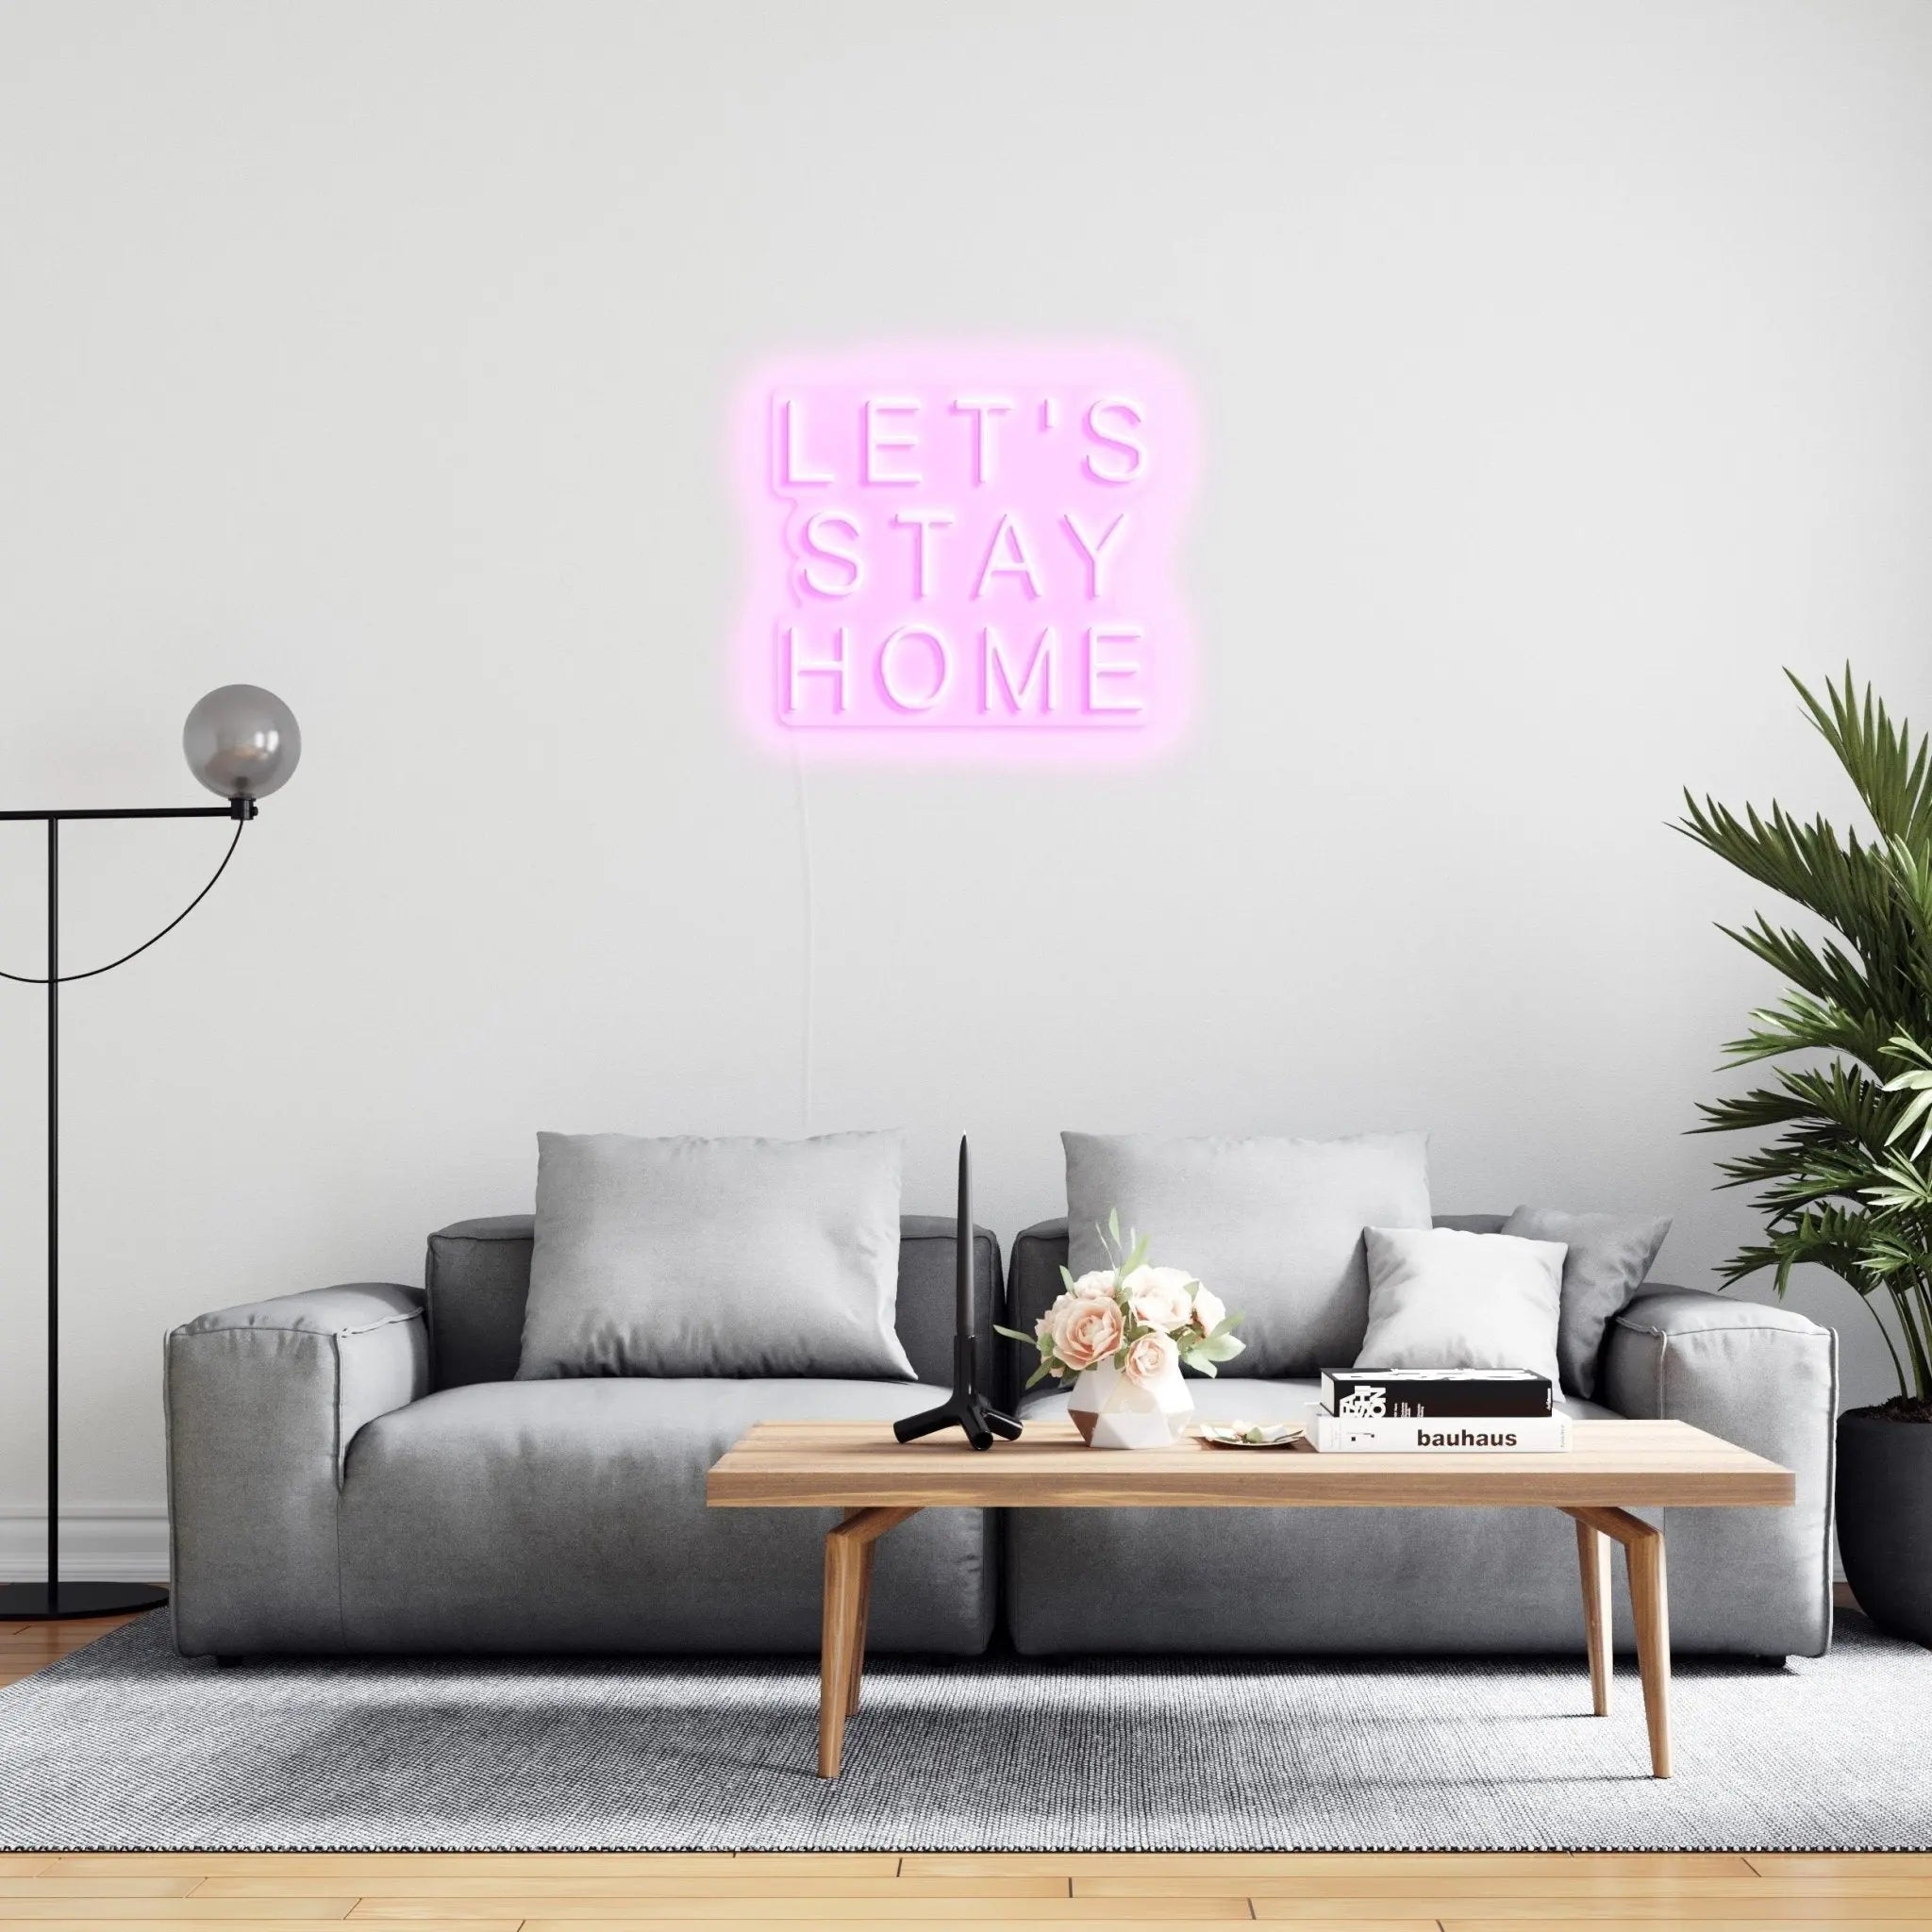 'Let's Stay Home' LED Neon Sign - neonaffair